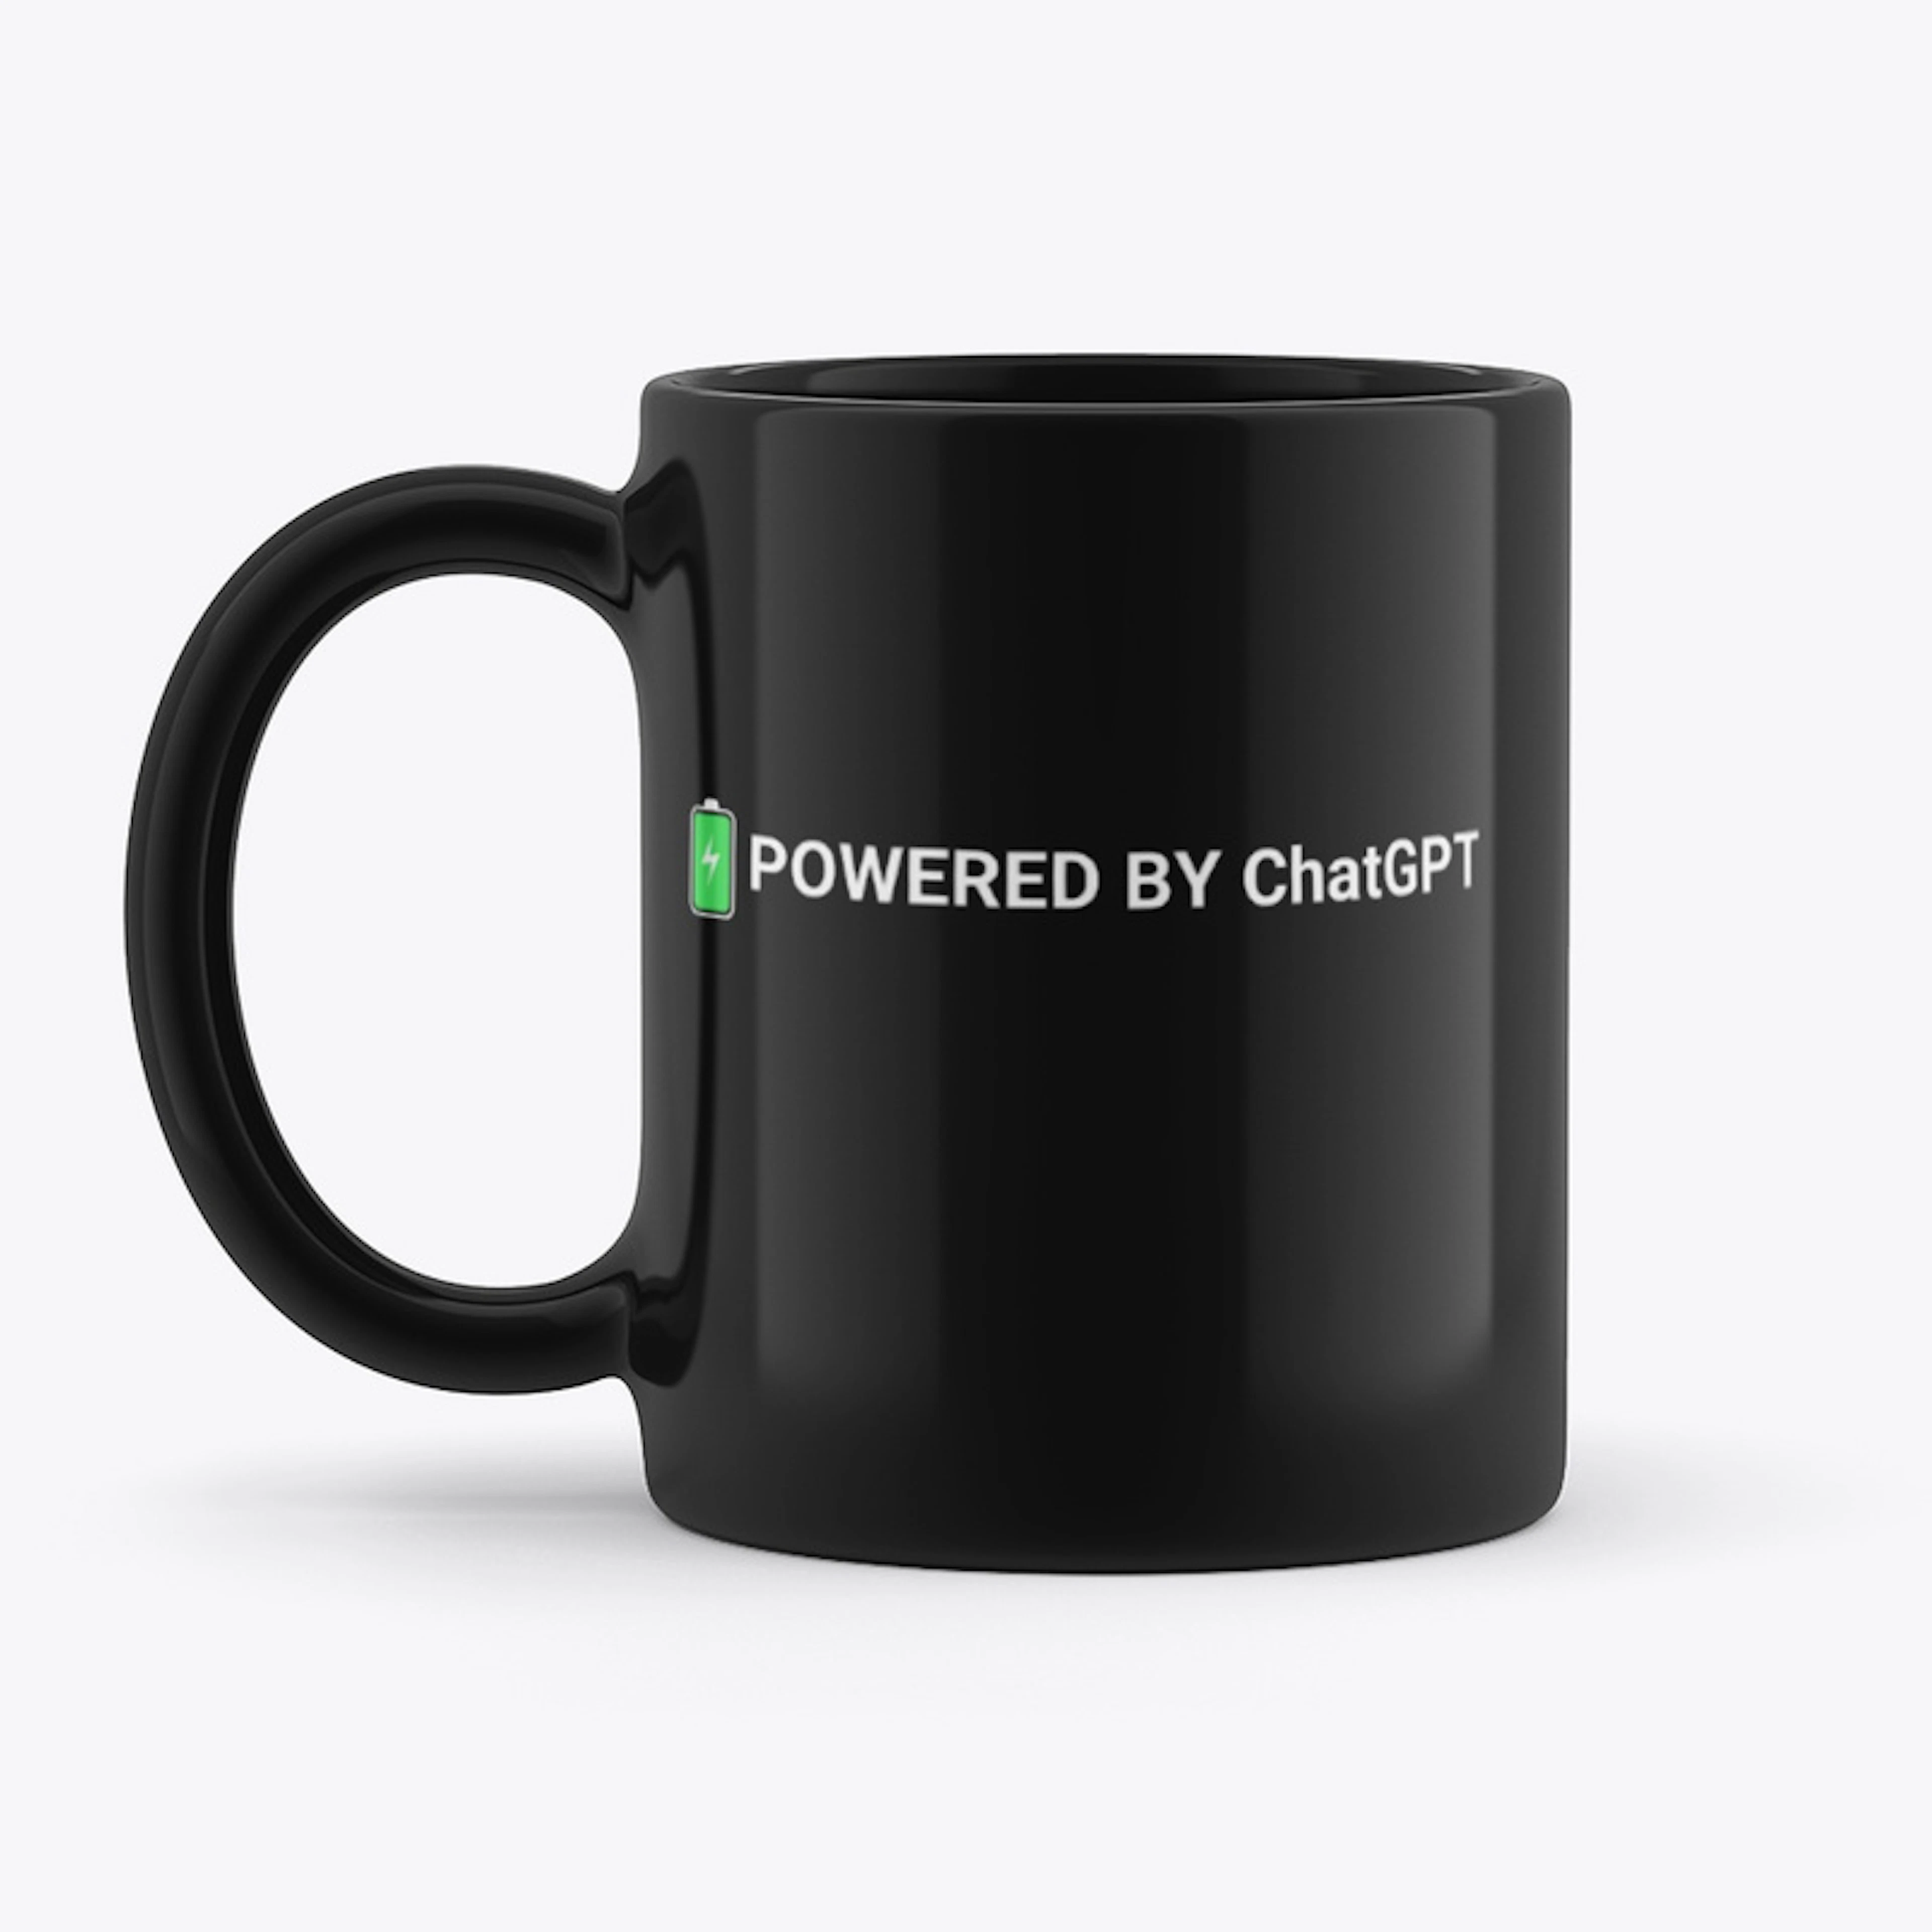 POWERED BY ChatGPT